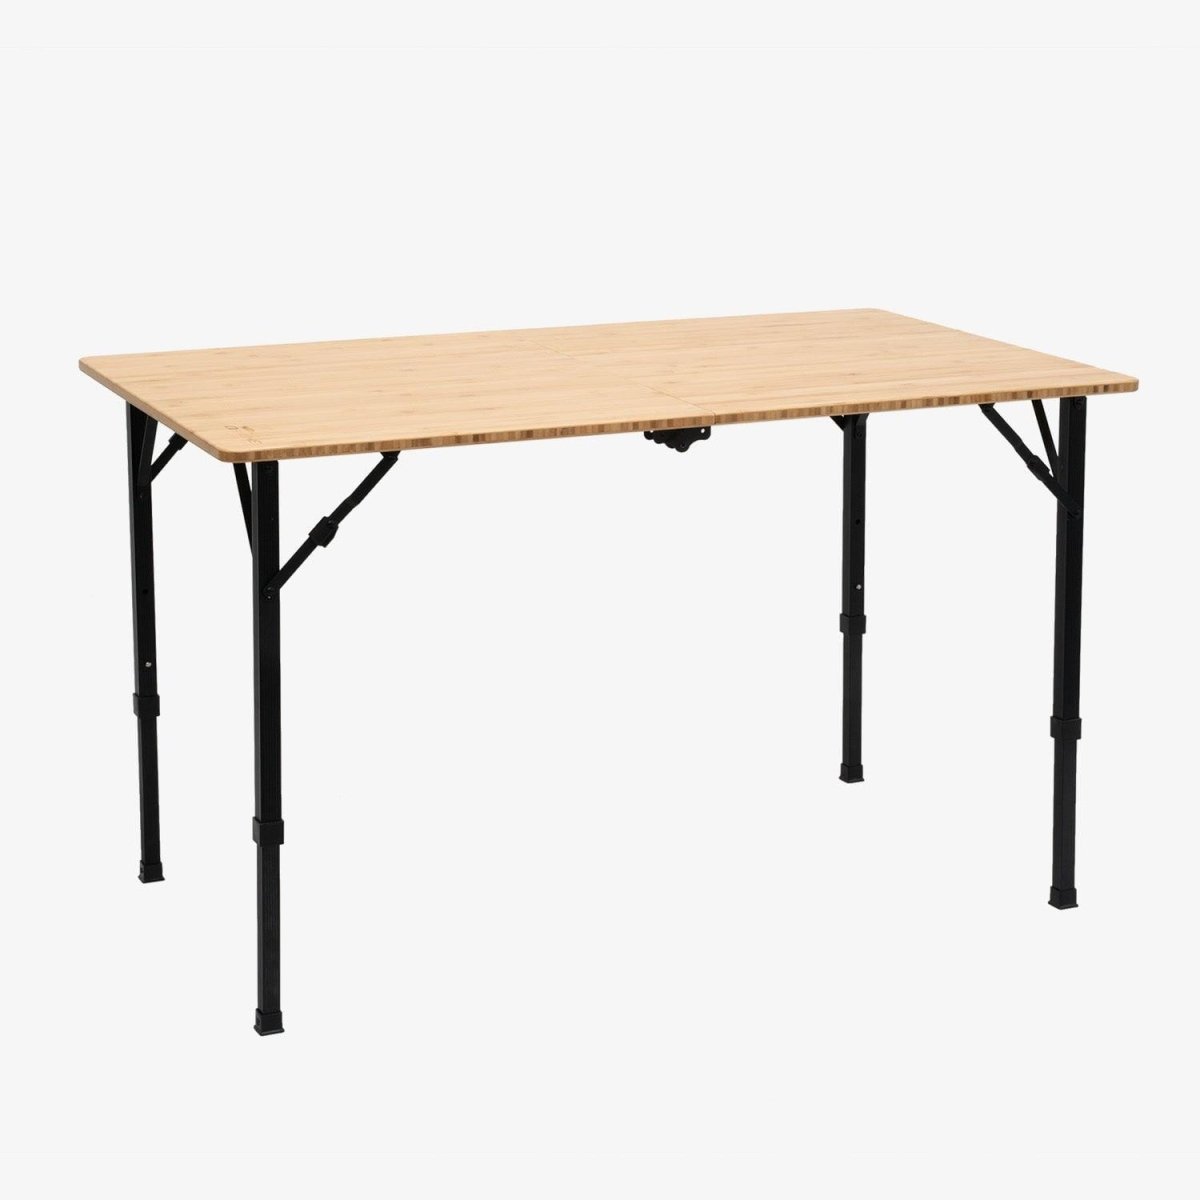 Darche ECO Bamboo Table - 120cm - NZ Offroader